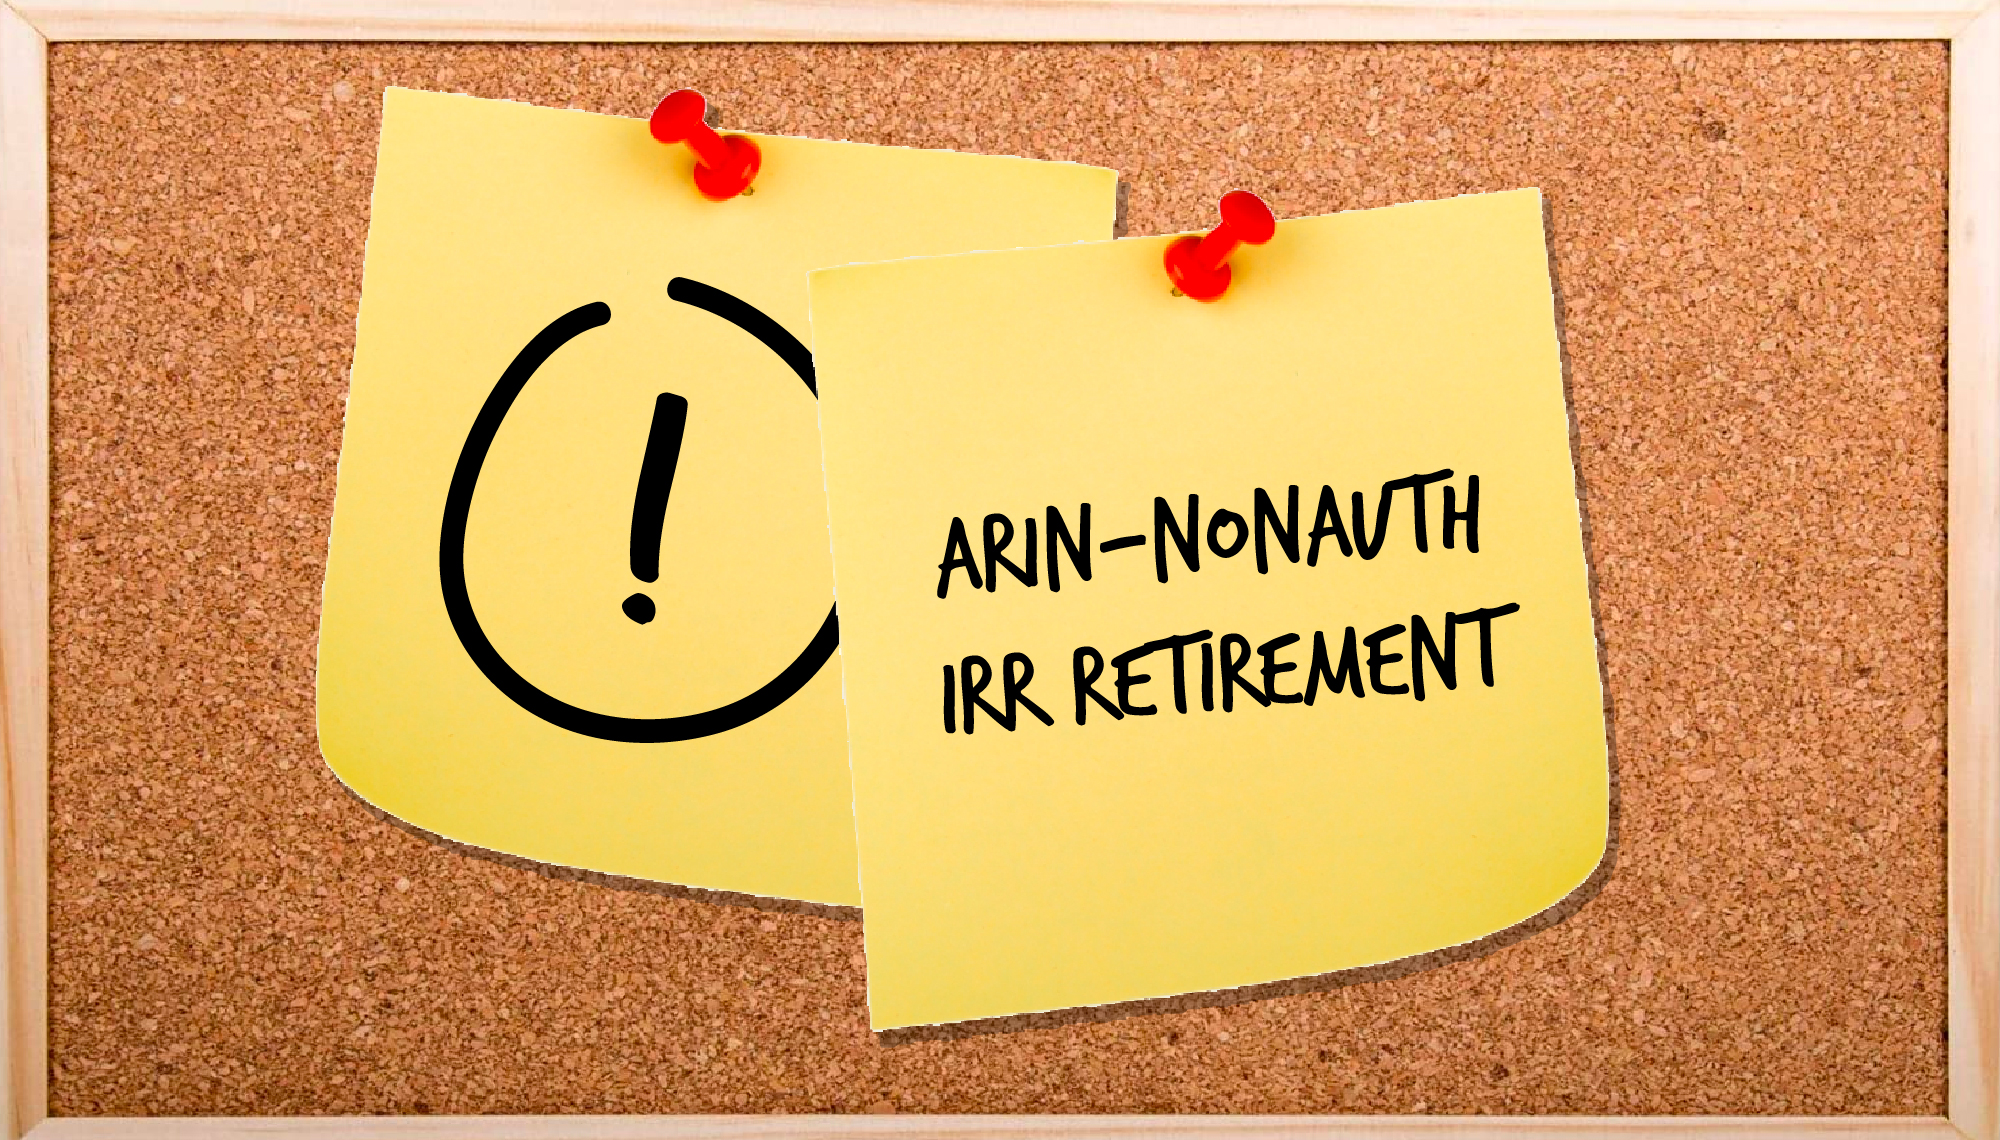 Take Action Now to Prepare for the ARIN-NONAUTH IRR Retirement